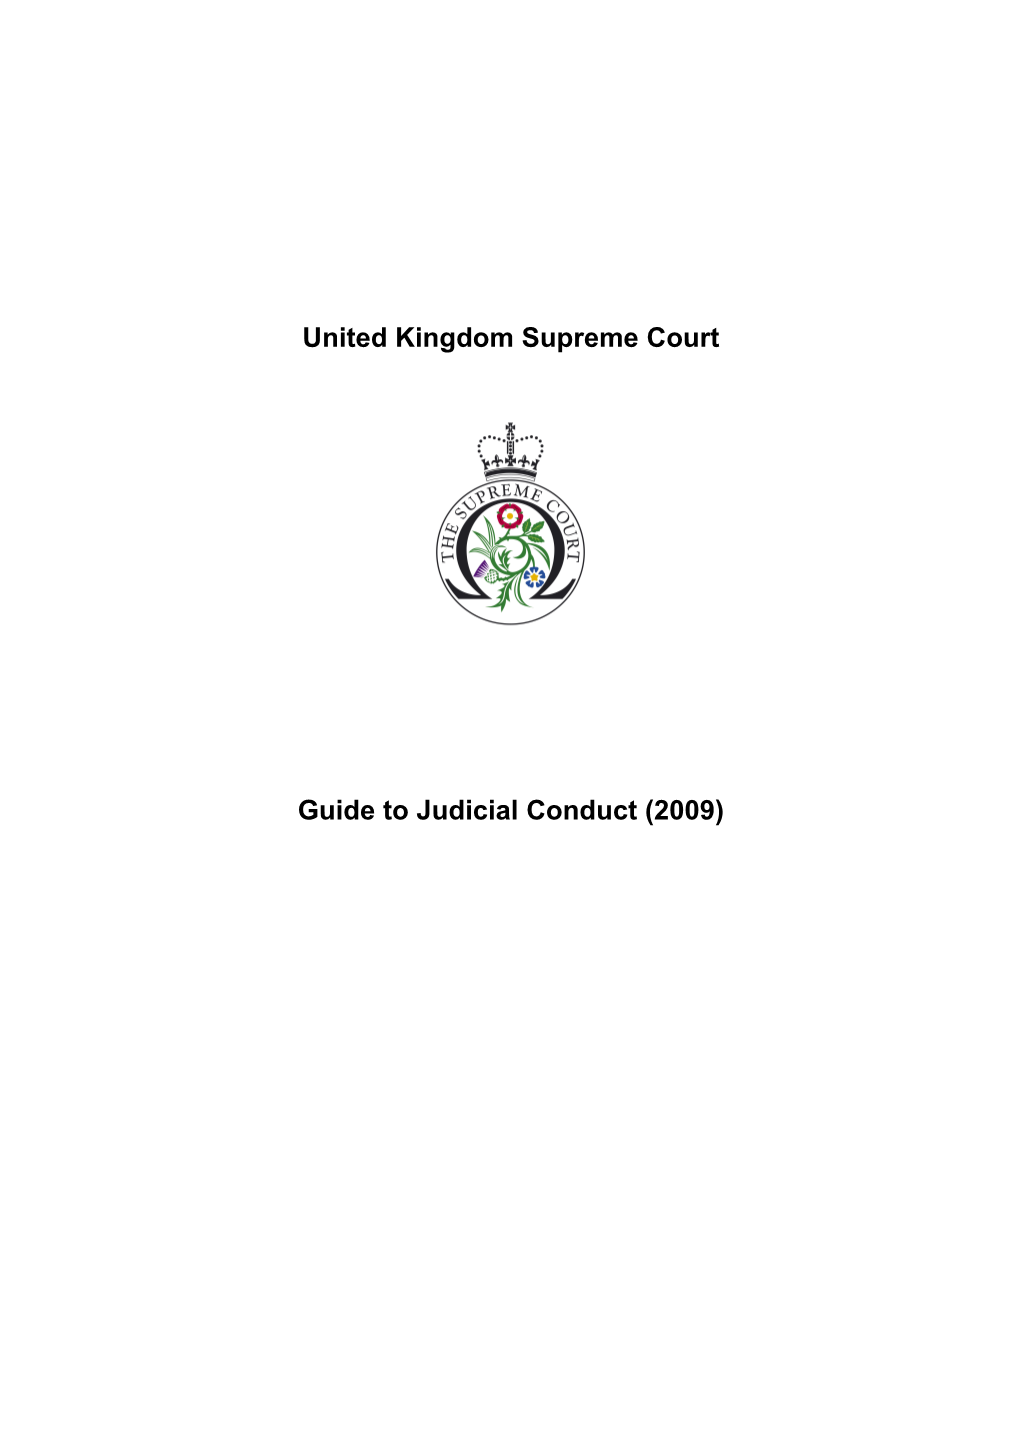 Guide to Judicial Conduct